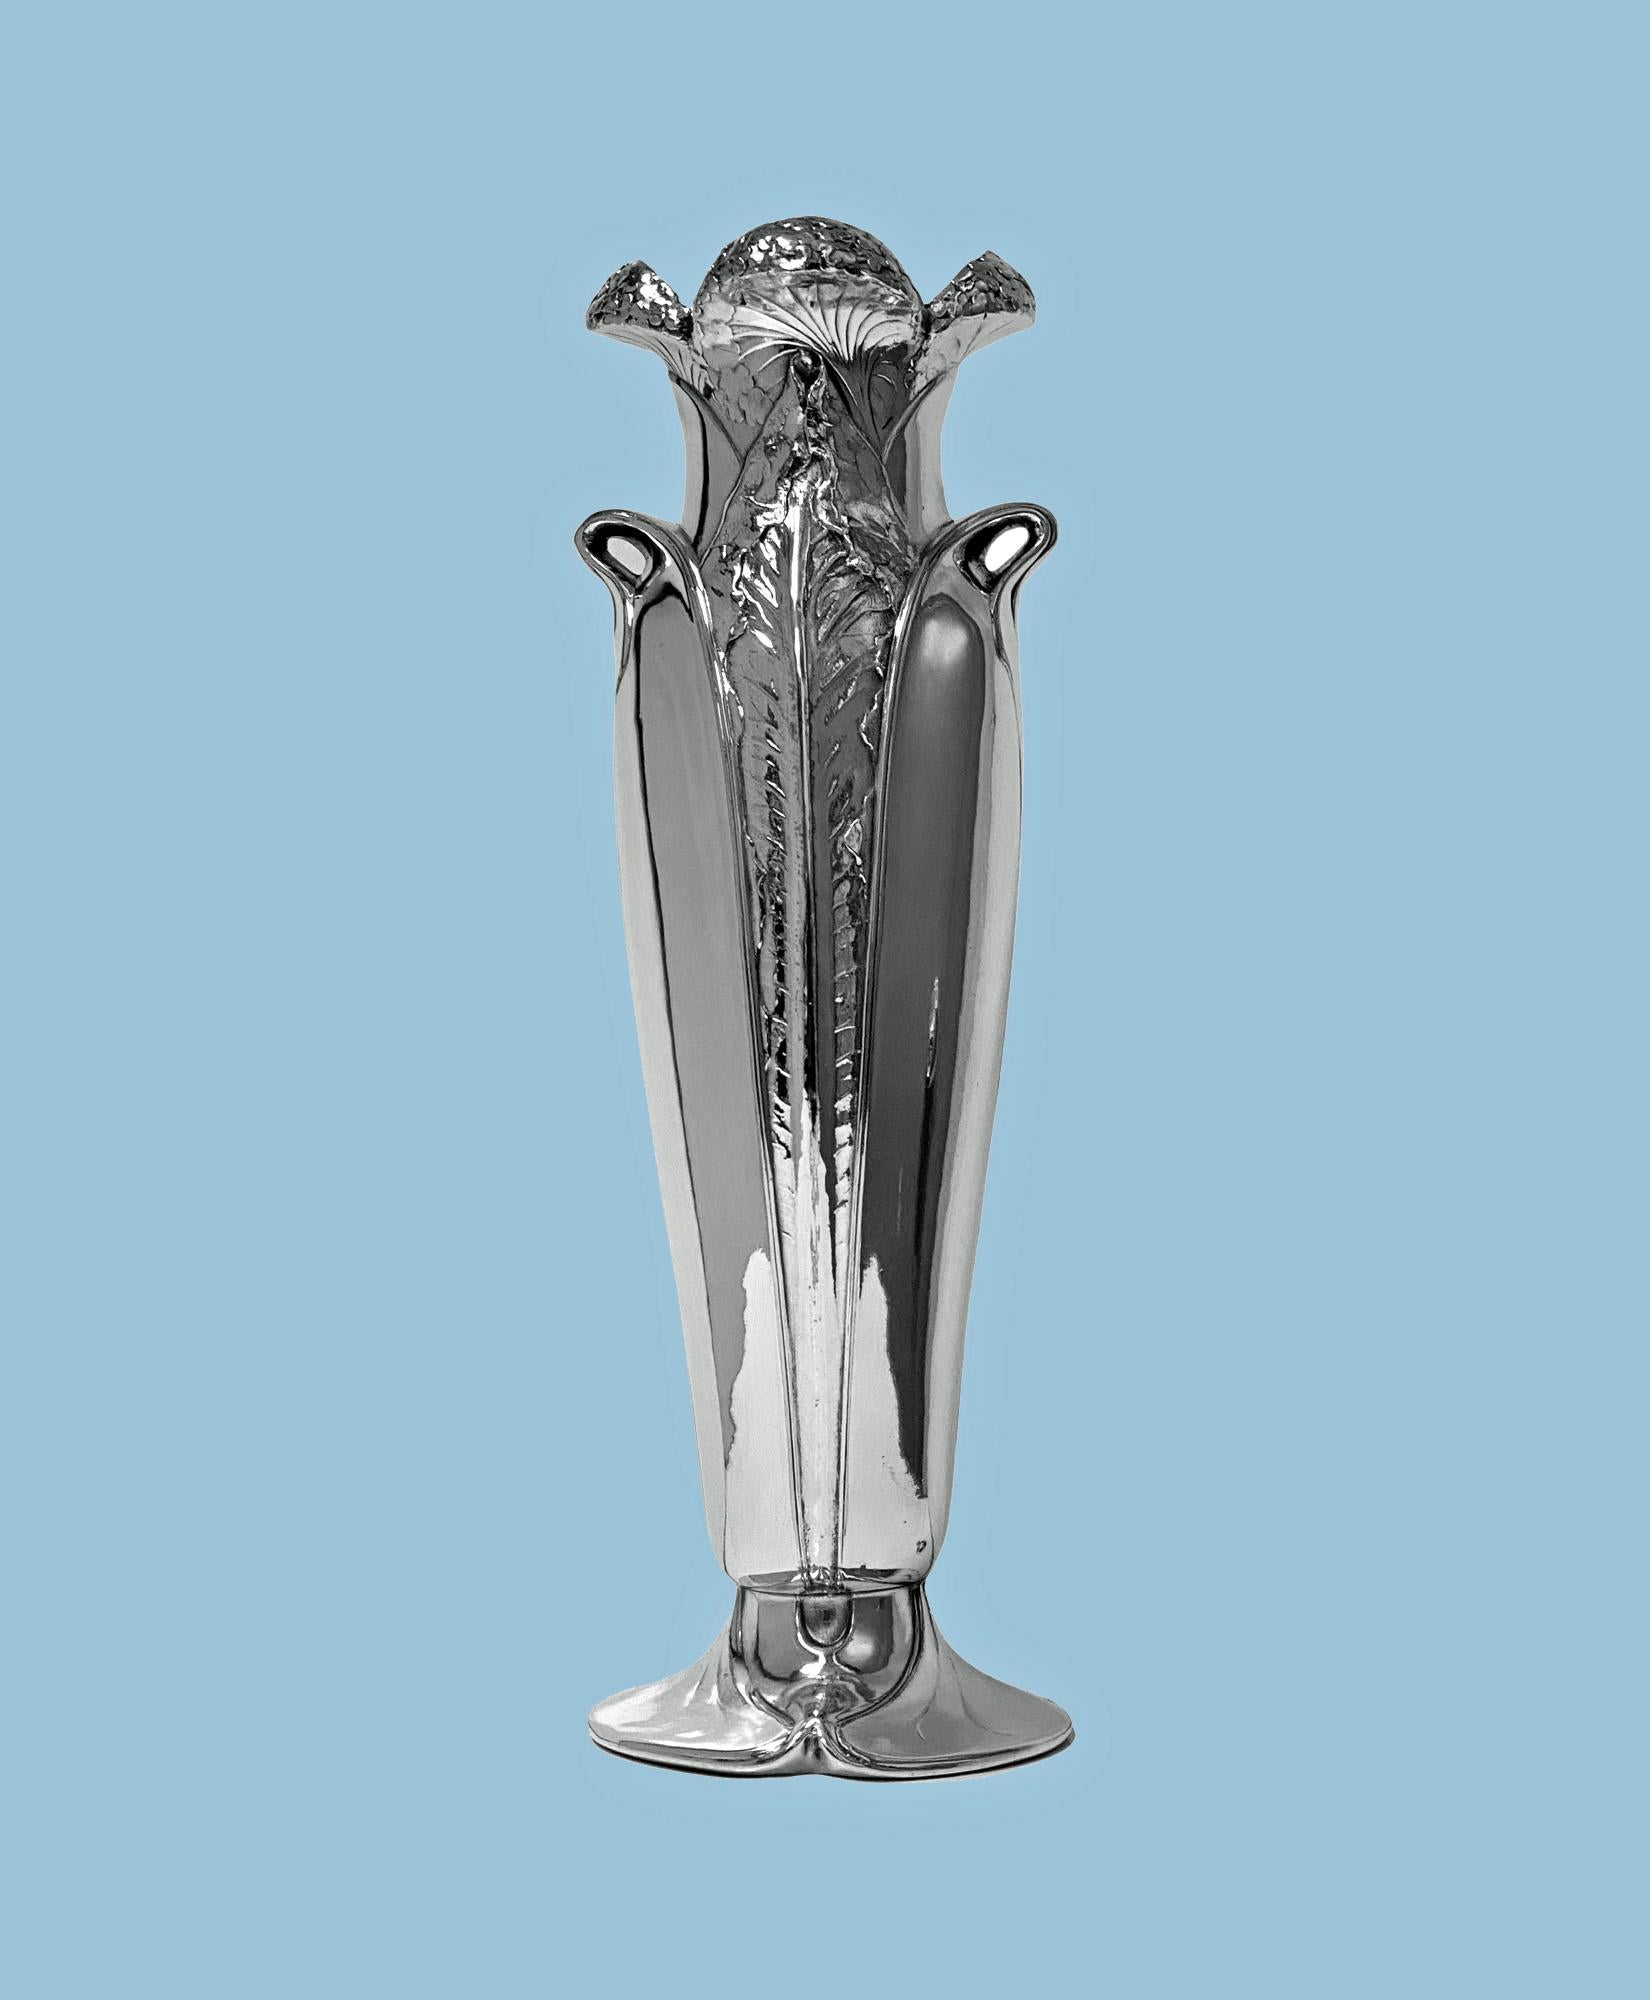 Antique Art Nouveau Christofle silver plate vase, France C.1900. The vase on oval swirl base rising to tapered bulbous form, elaborately decorated with raised tendril foliage design, the handles conforming, the top of open bud petal design. Overall